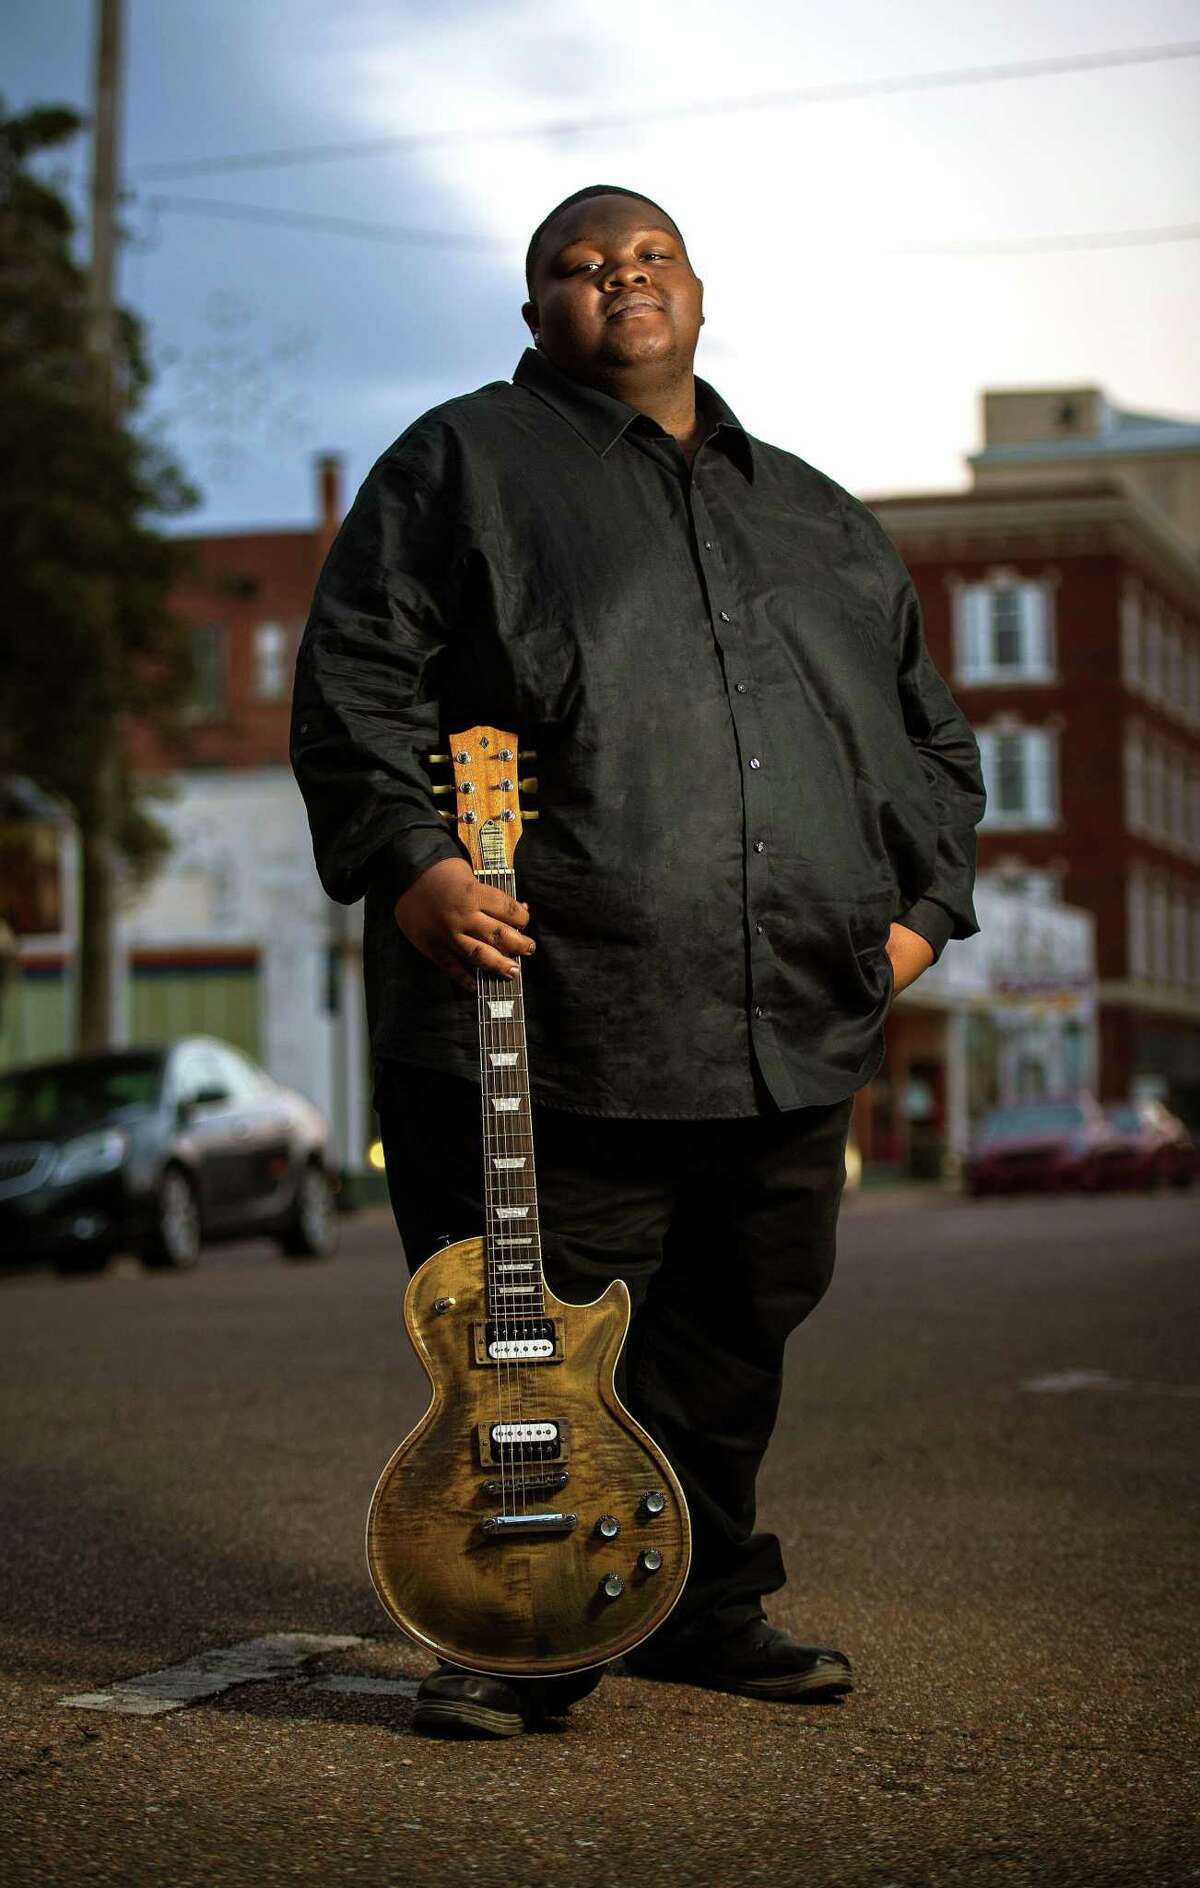 Blues sensation Christone “Kingfish” Ingram is set to perform three times in Connecticut next weekend. He’s celebrating the release of his dynamic second Alligator Records album, the recently Grammy-nominated “662” , which debuted at #1 on the Billboard Blues chart.